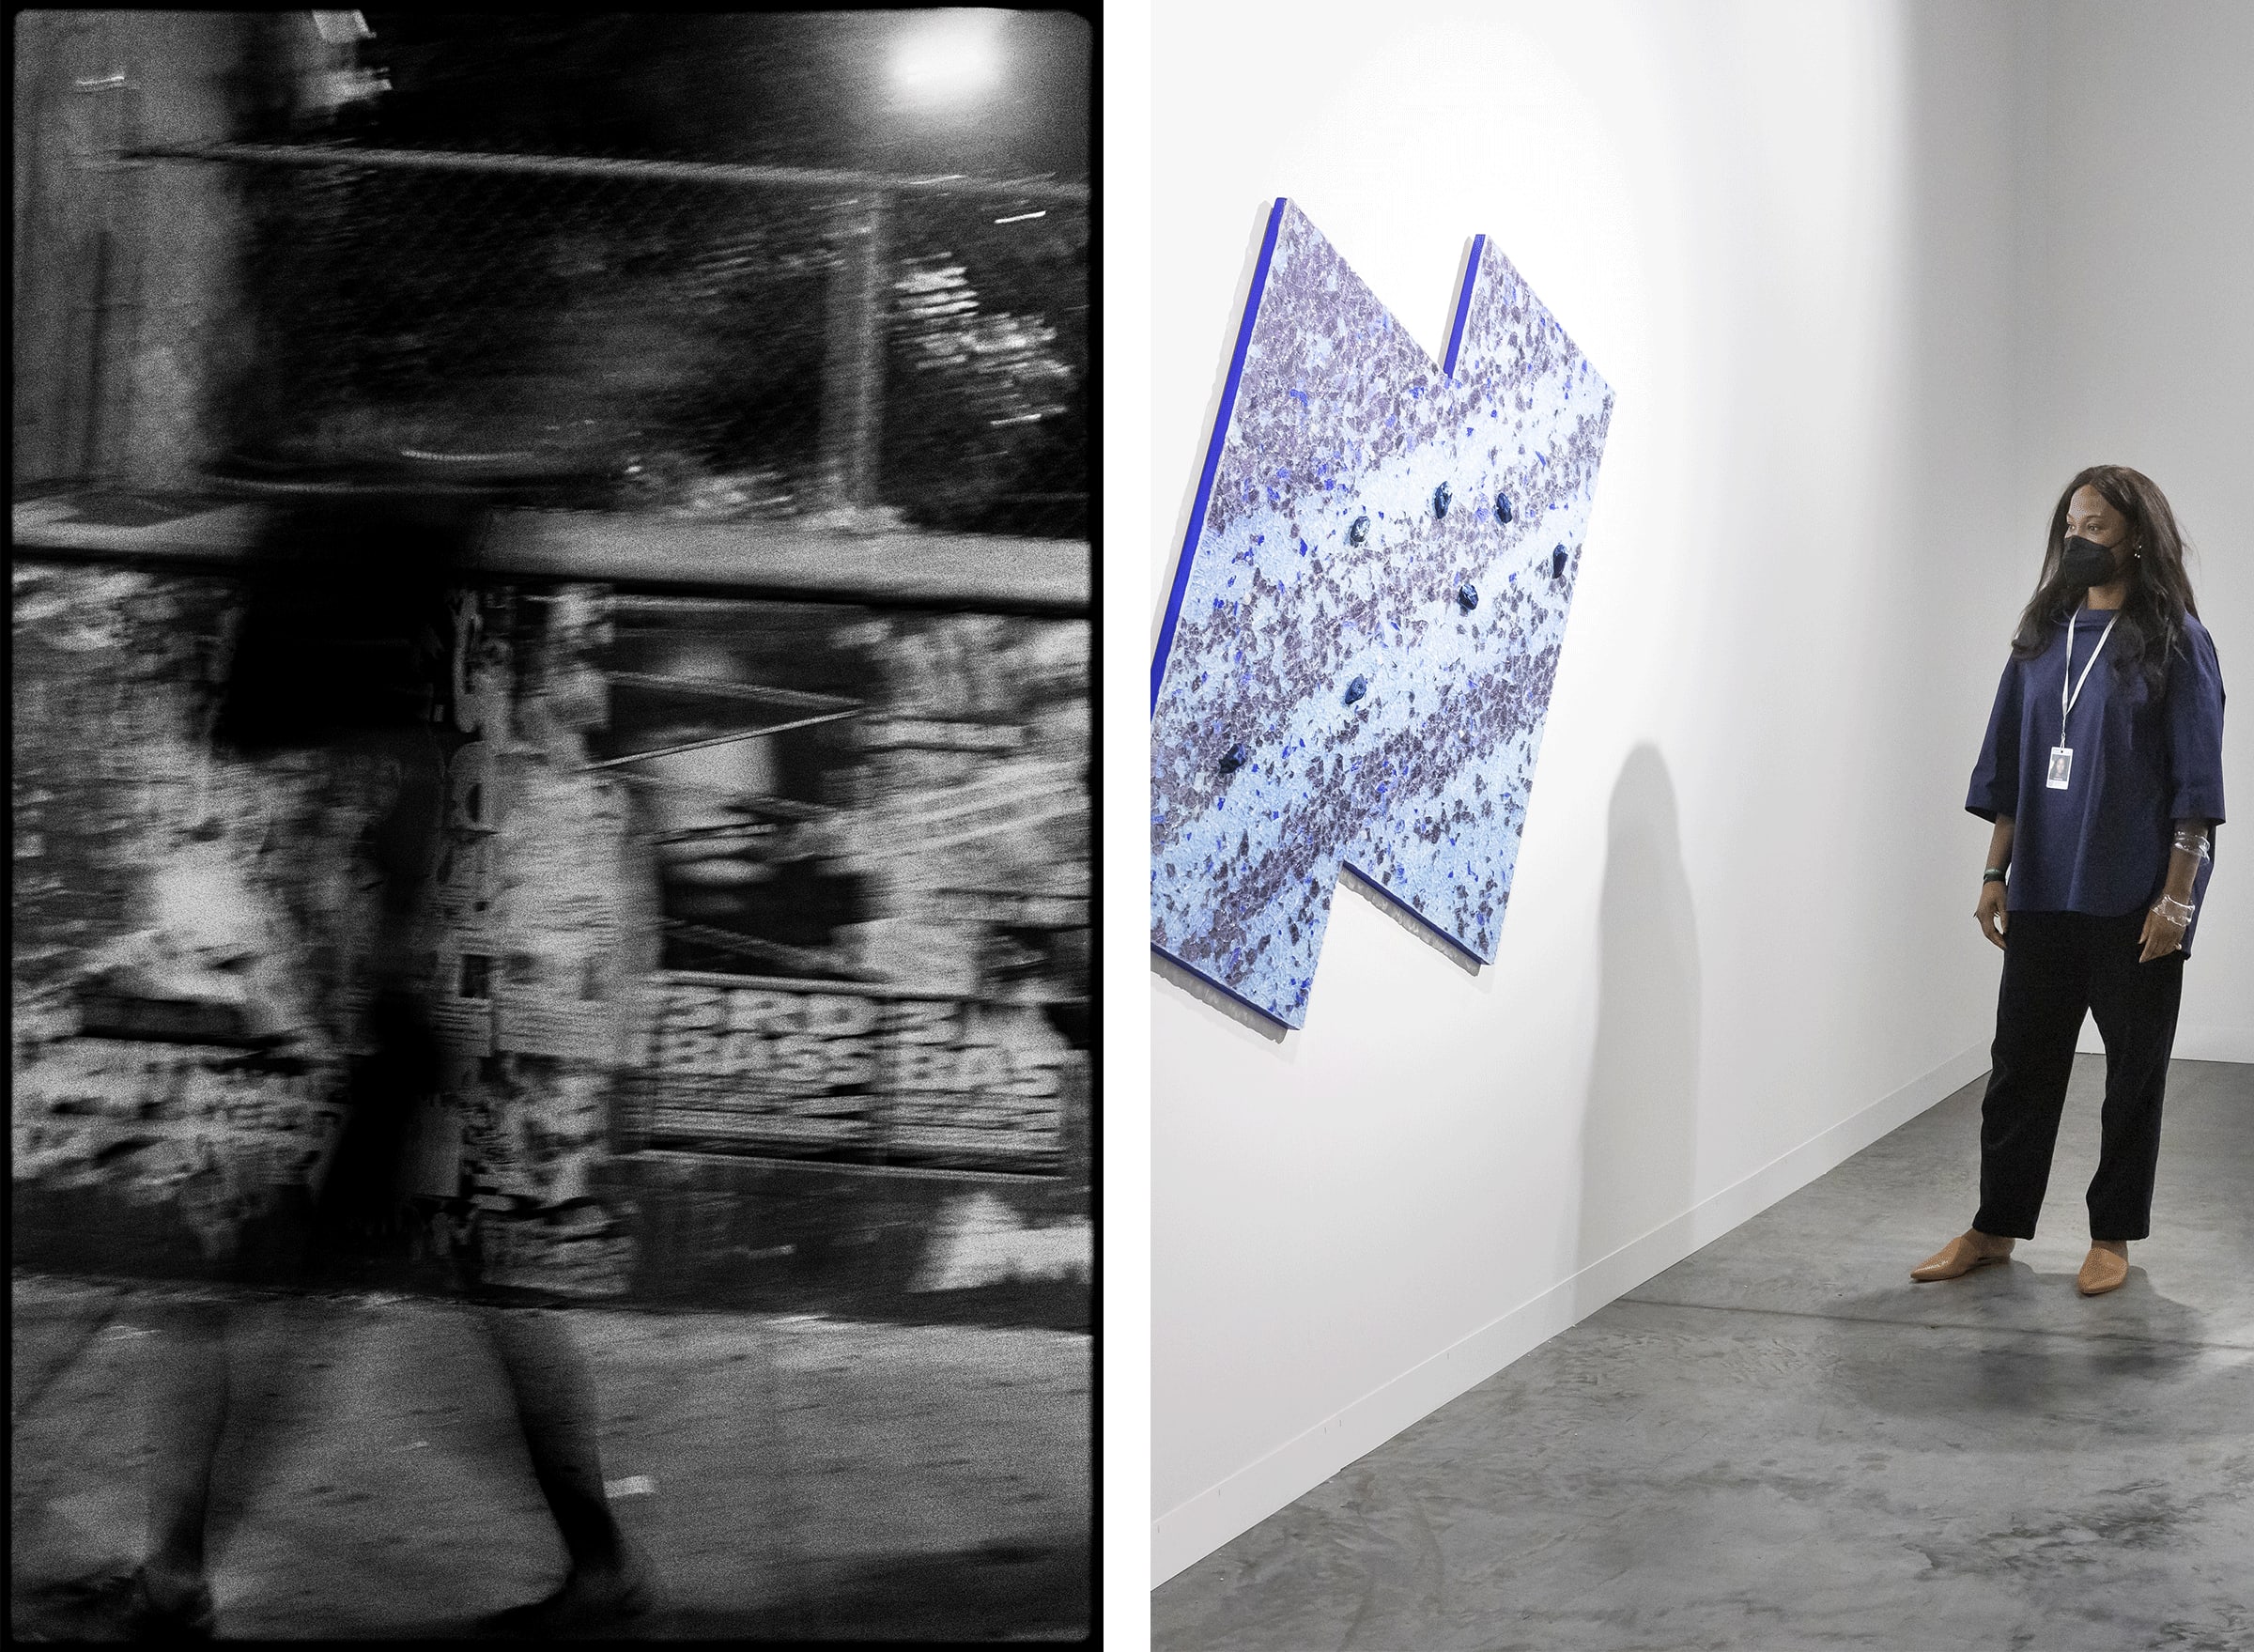 Left: Ming Smith, August Blues (Harlem, New York), 1991. © [2023] Ming Smith / Artists Rights Society (ARS), New York. Courtesy of the artist and Nicola Vassell. Right: Nicola Vassell looking at an artwork by Alteronce Gumby in her booth in the Nova sector of Art Basel Miami Beach 2021.